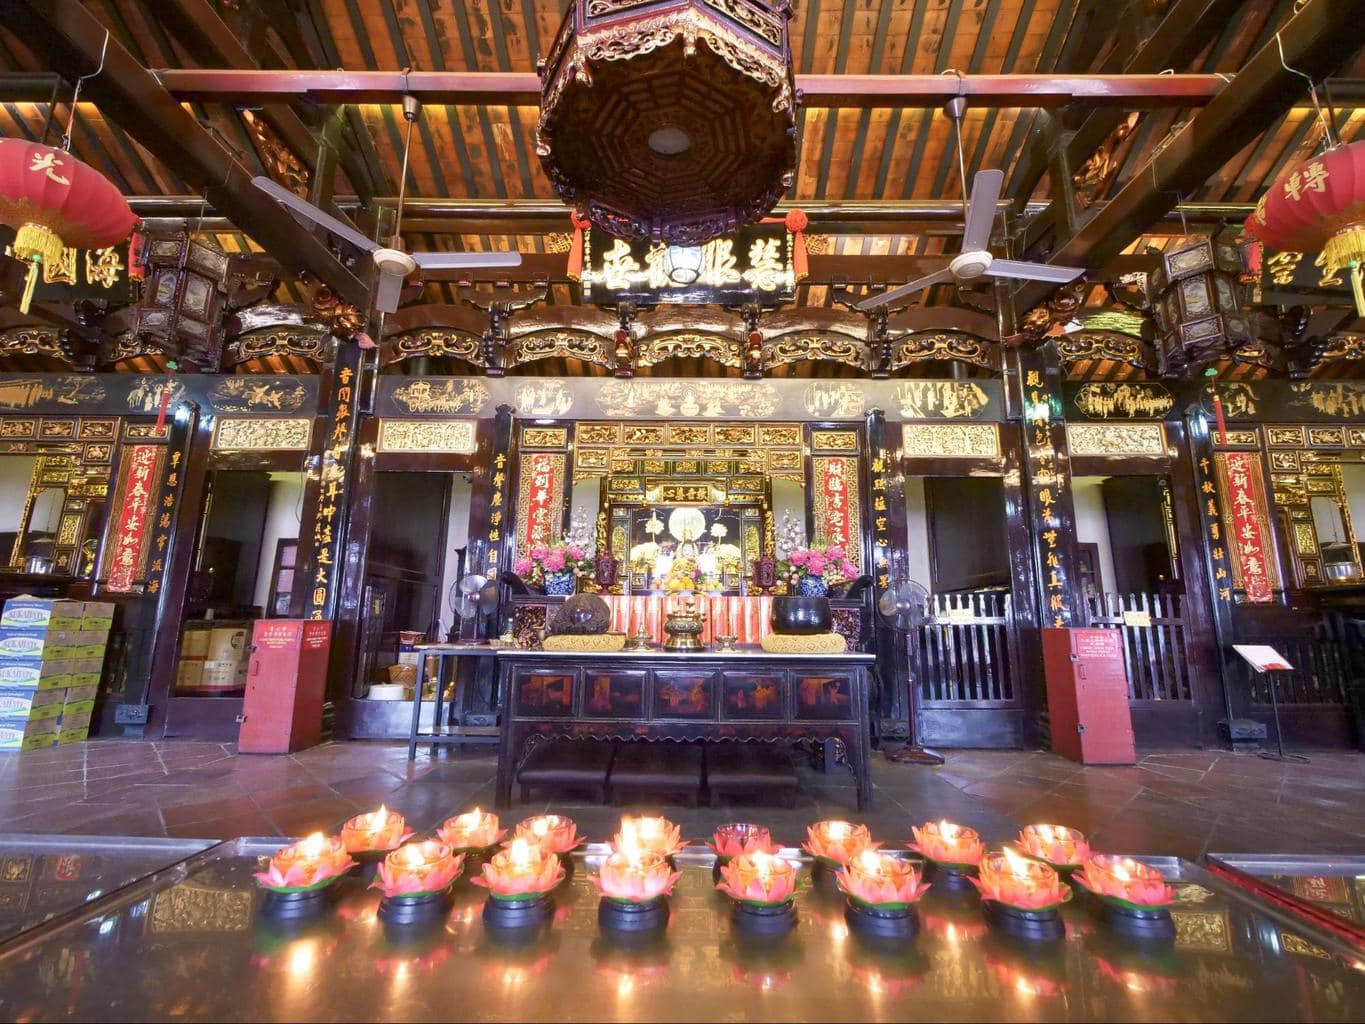 Malacca’s most famous temple, Cheng Hoon Teng